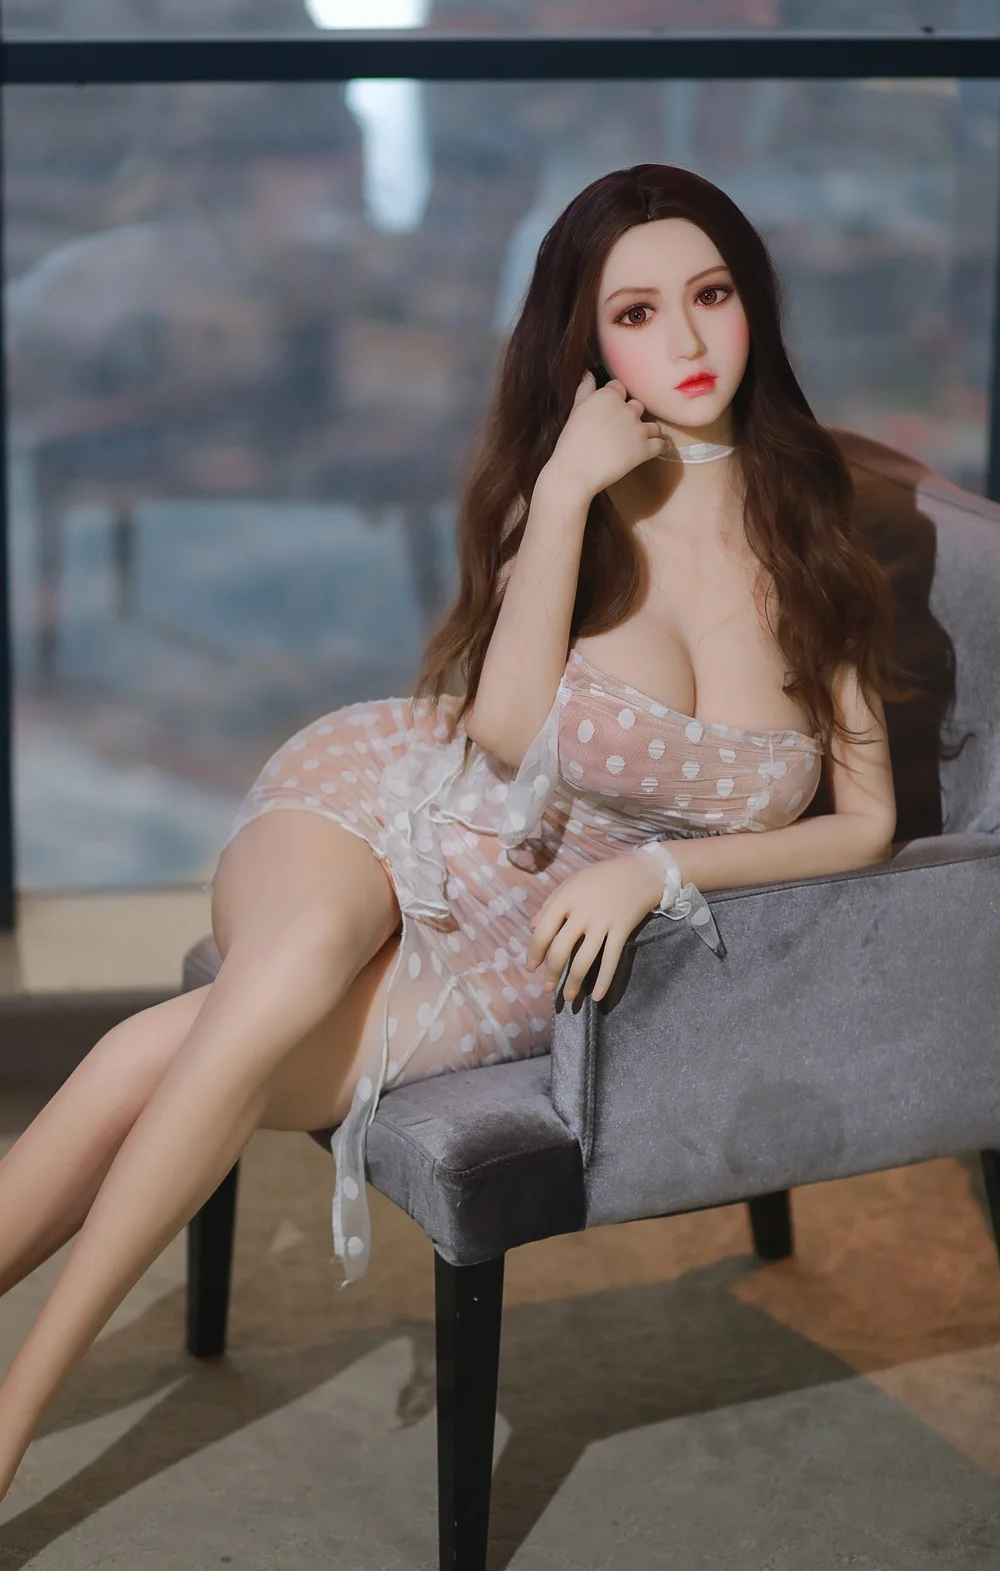 Sex doll in white lace dress